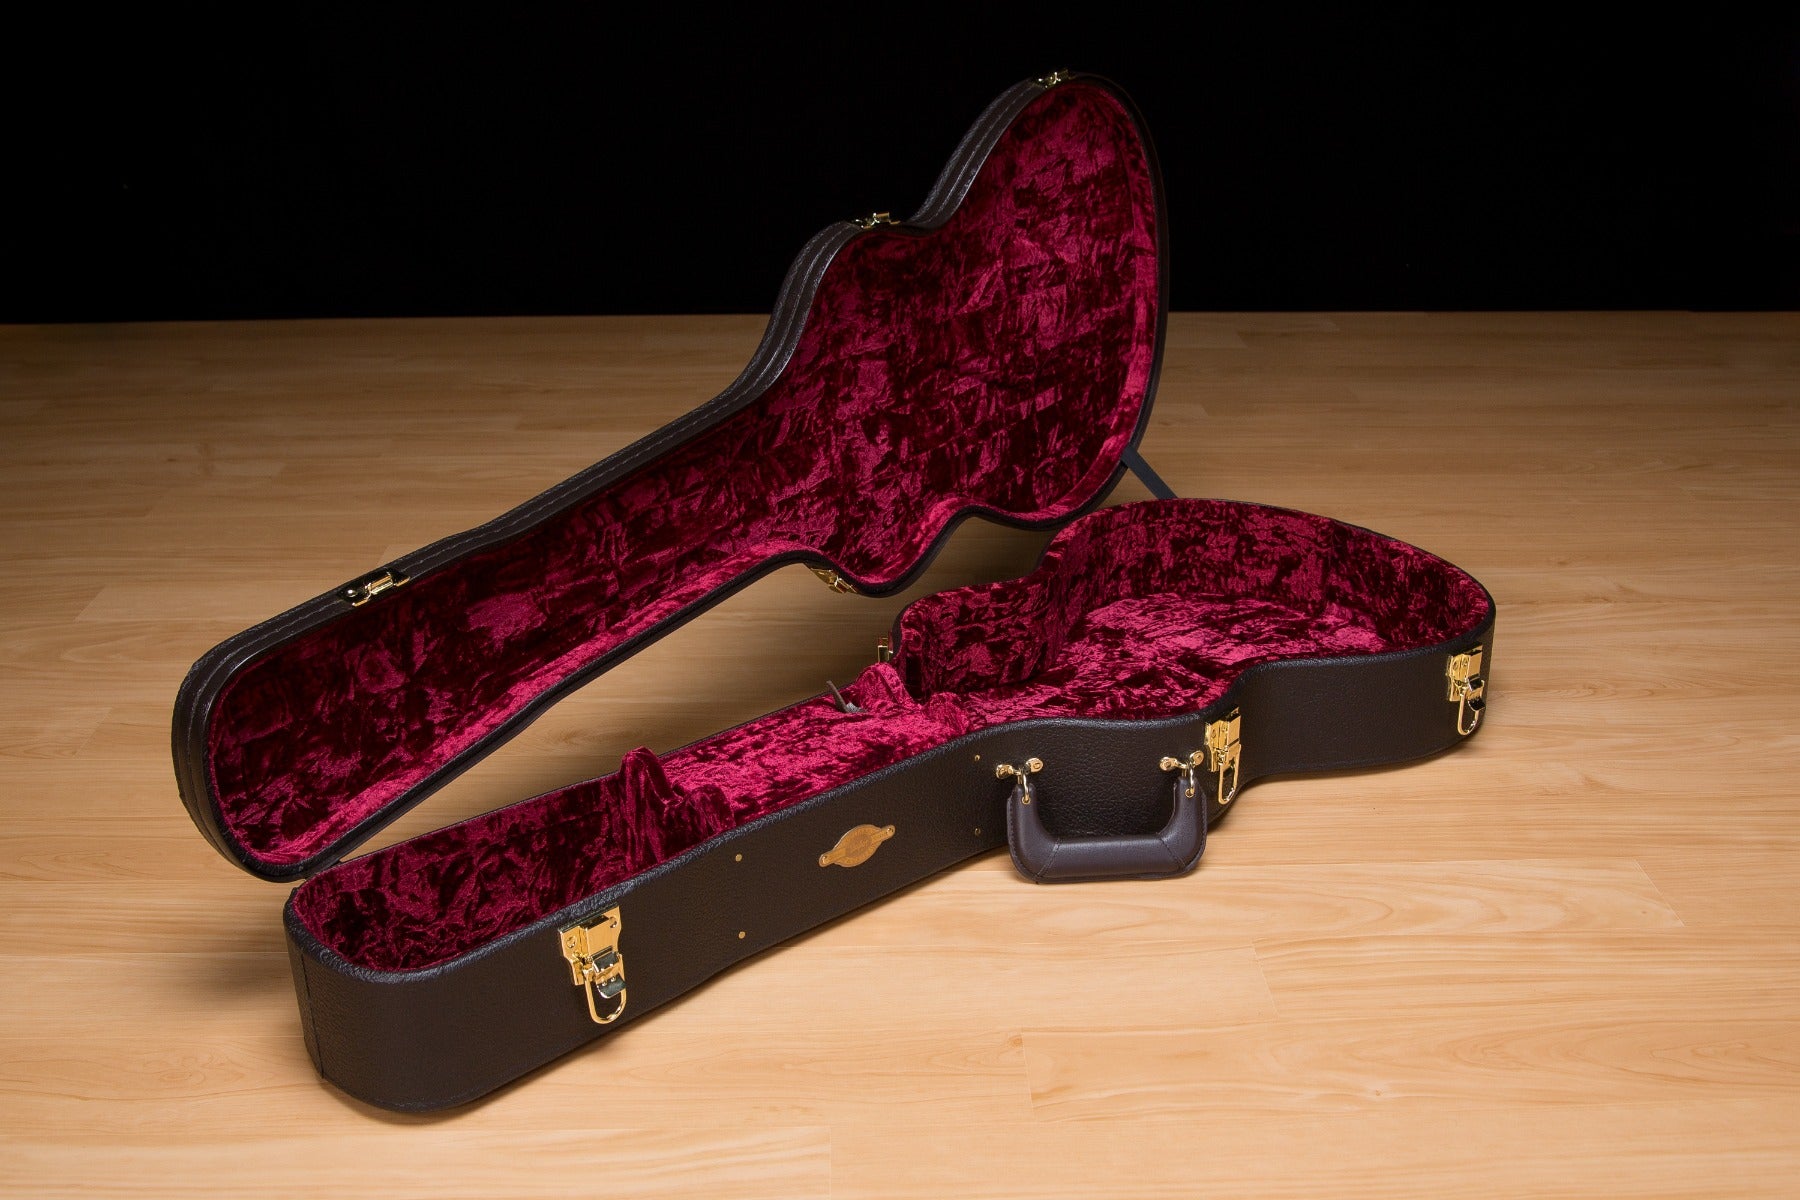 Included guitar case for the Taylor 214ce DLX Acoustic-Electric Guitar view 2